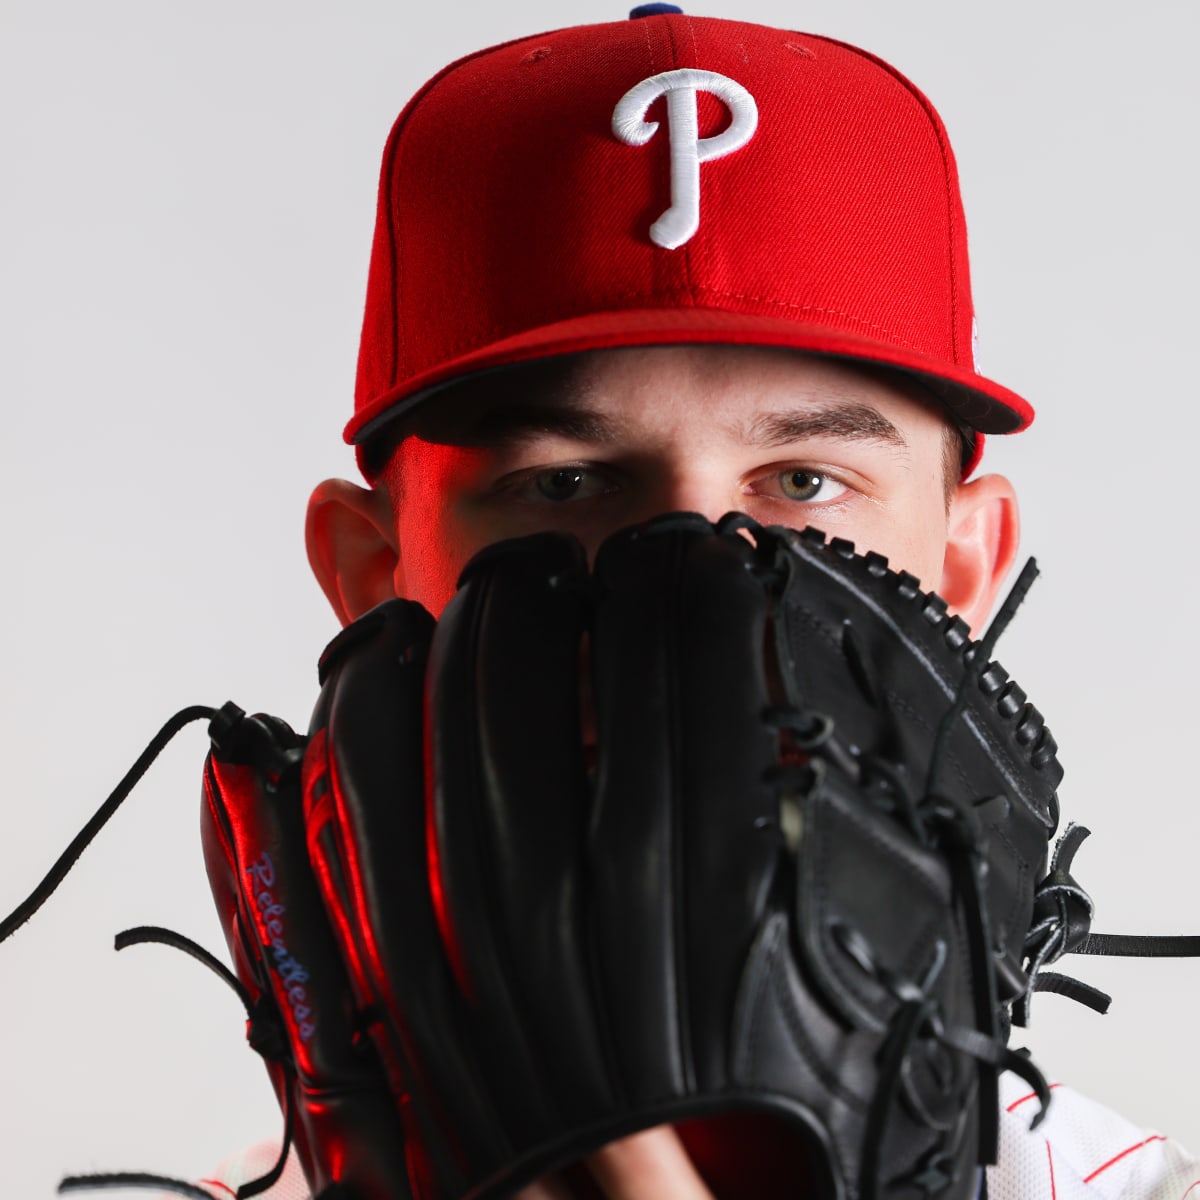 Phillies Top Prospects Removed from Games as Deadline Looms